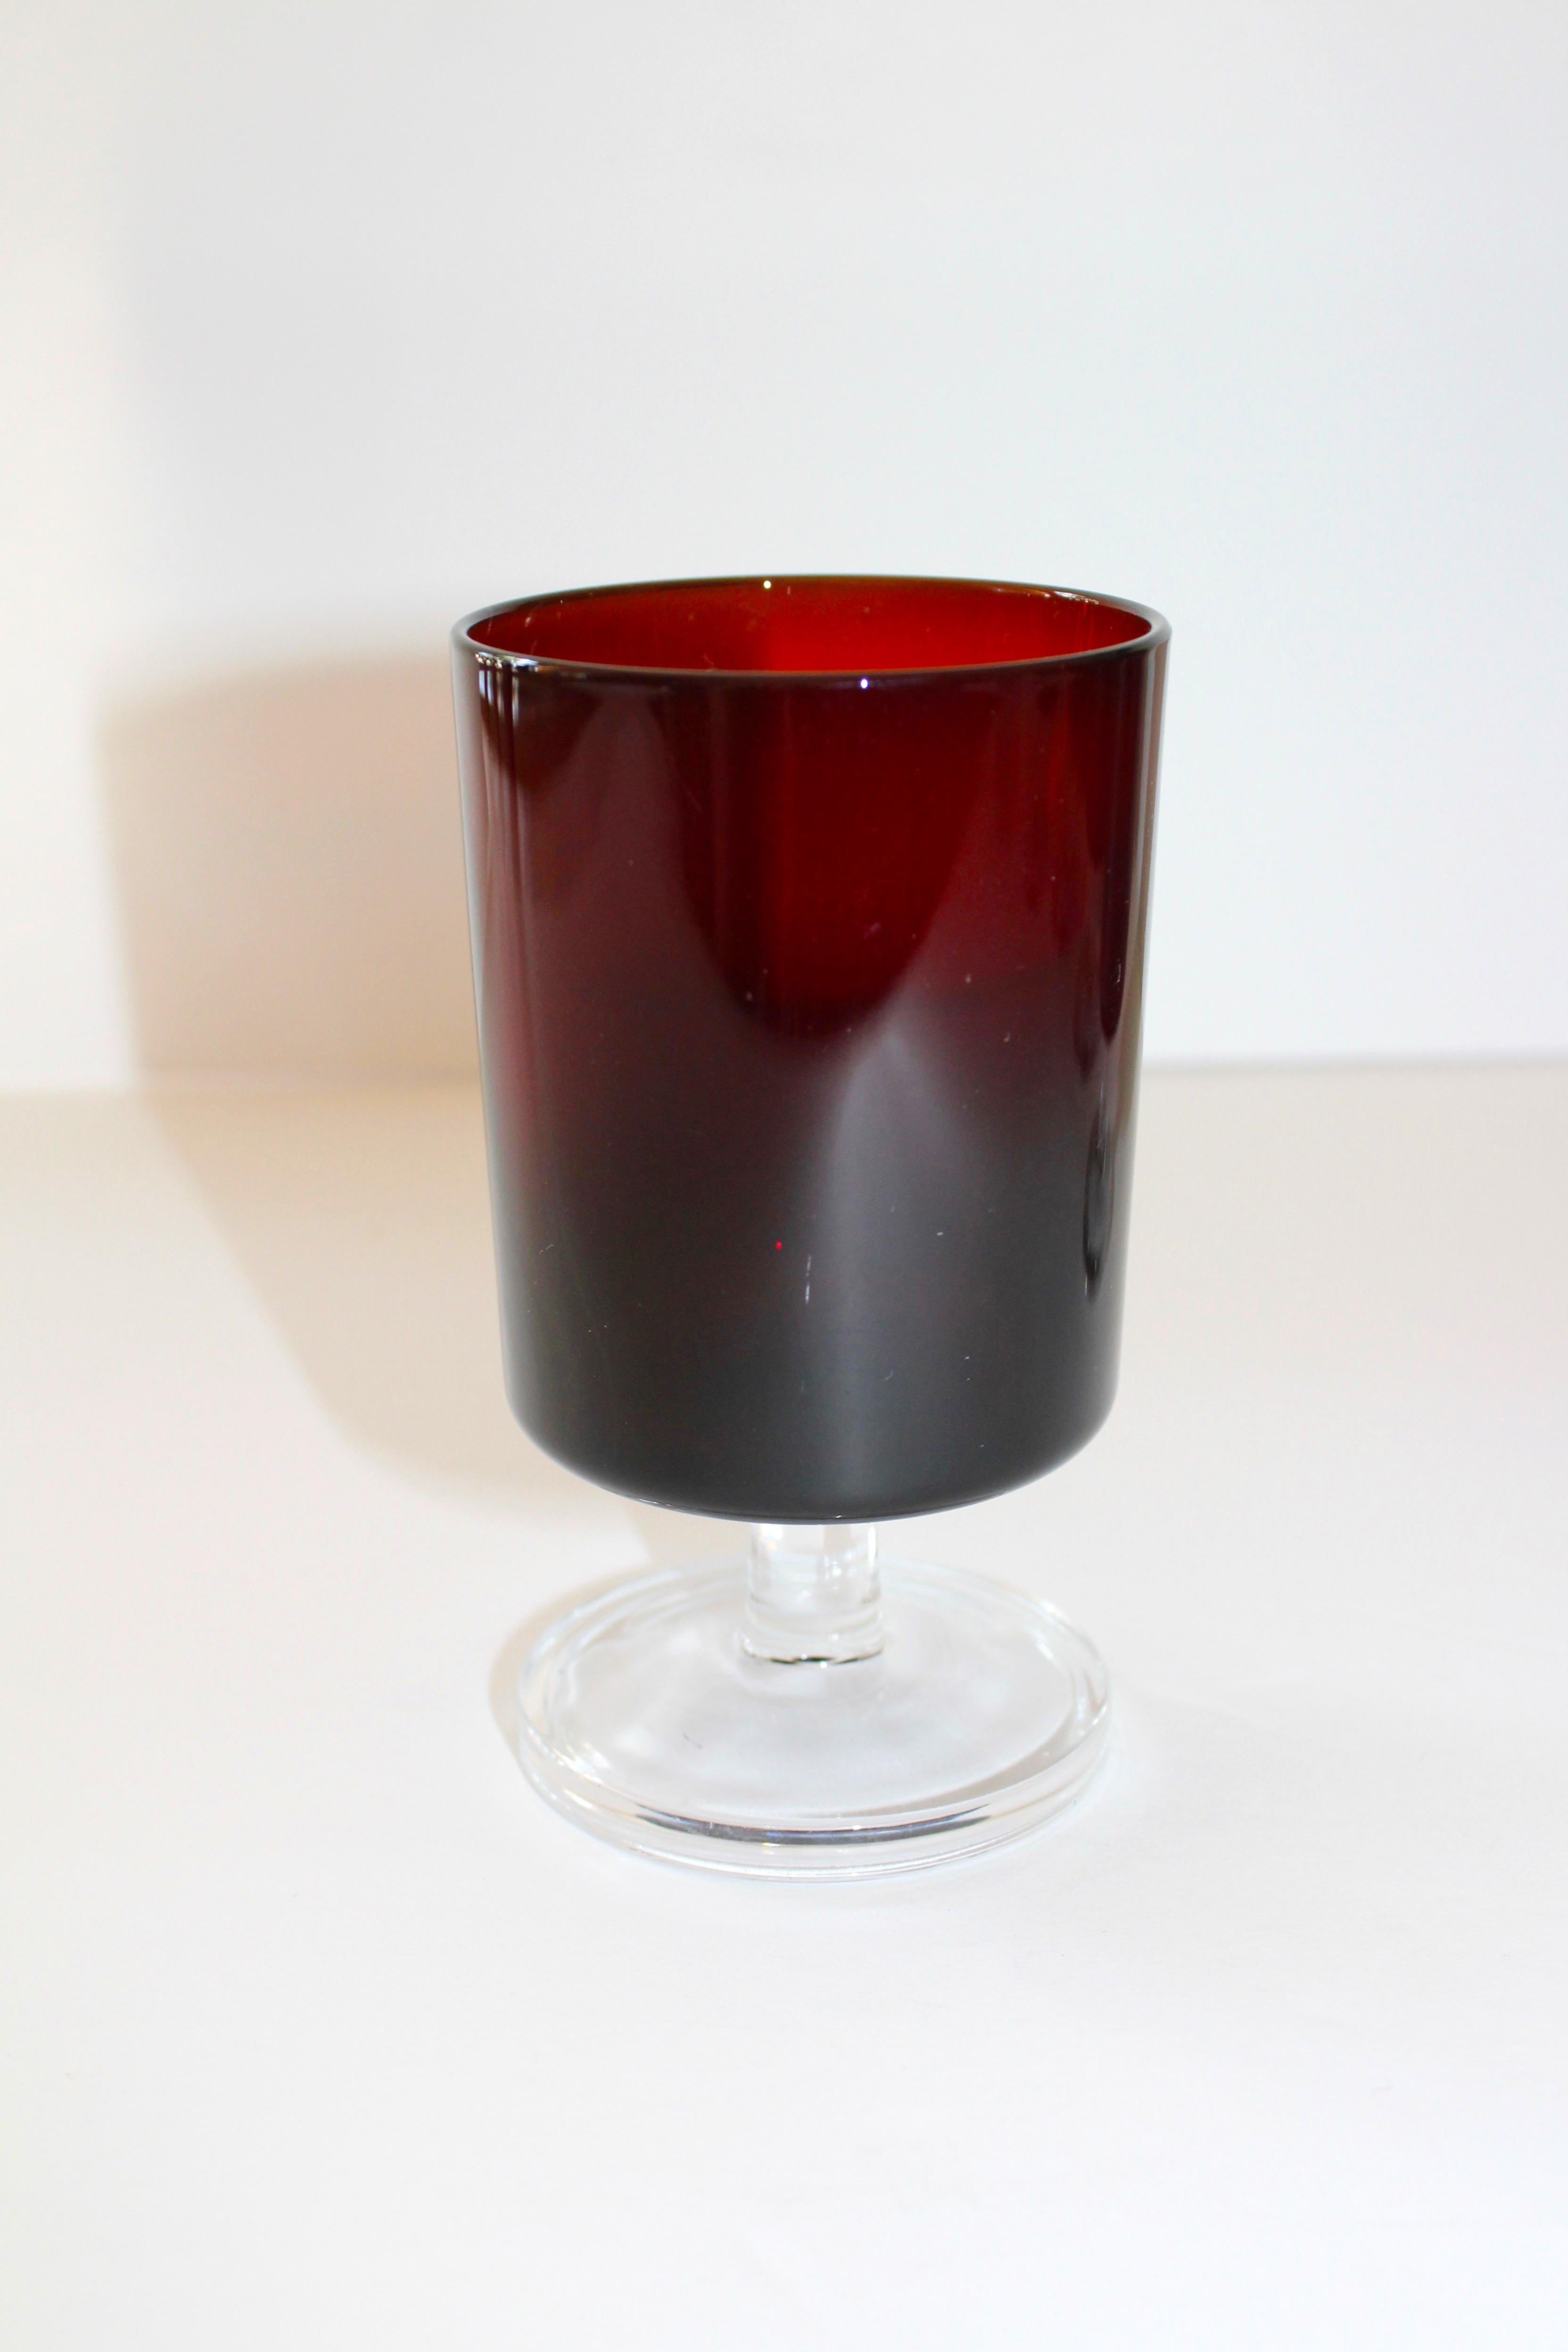 French Vintage Stemware Glasses in Ruby Red, Set of Eight, c. 1960s 1